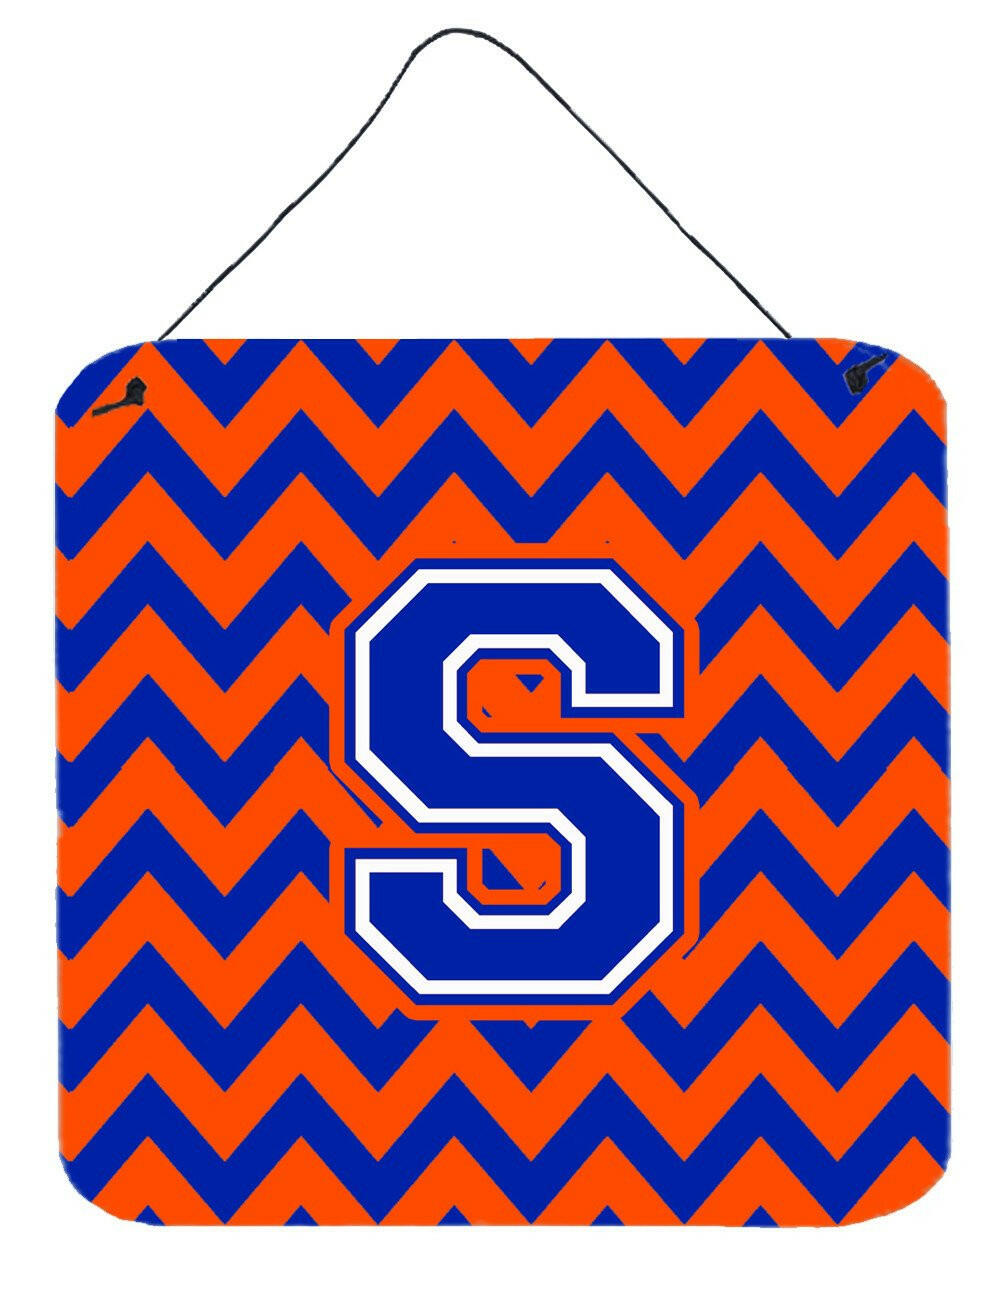 Letter S Chevron Orange and Blue Wall or Door Hanging Prints CJ1044-SDS66 by Caroline's Treasures